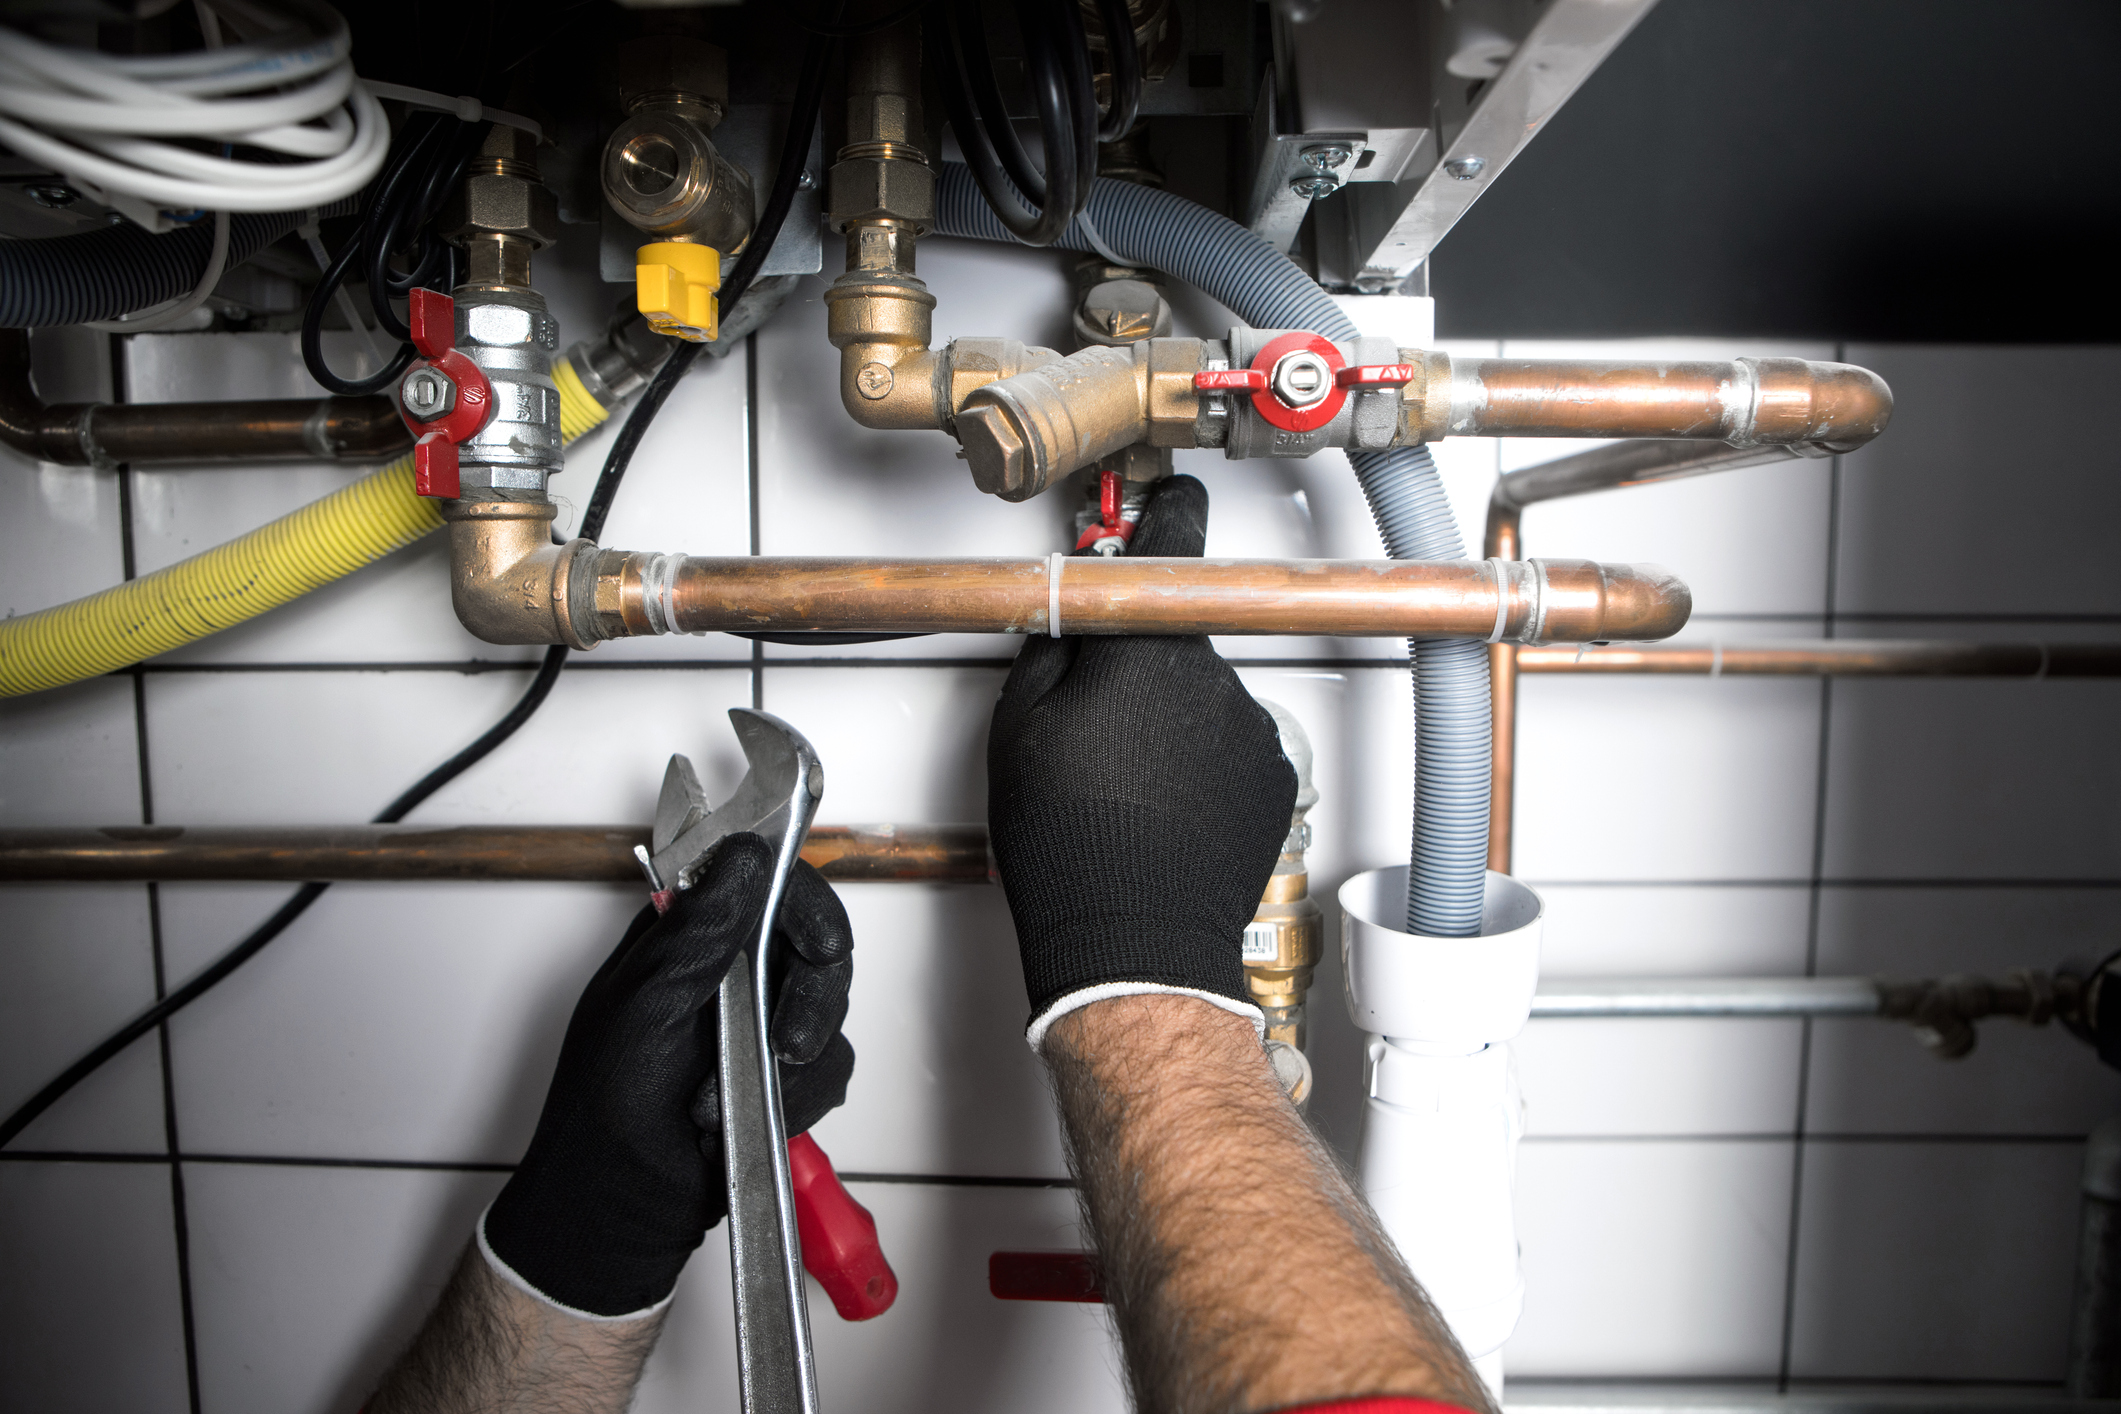 A plumber adding new plumbing pipes below a counter